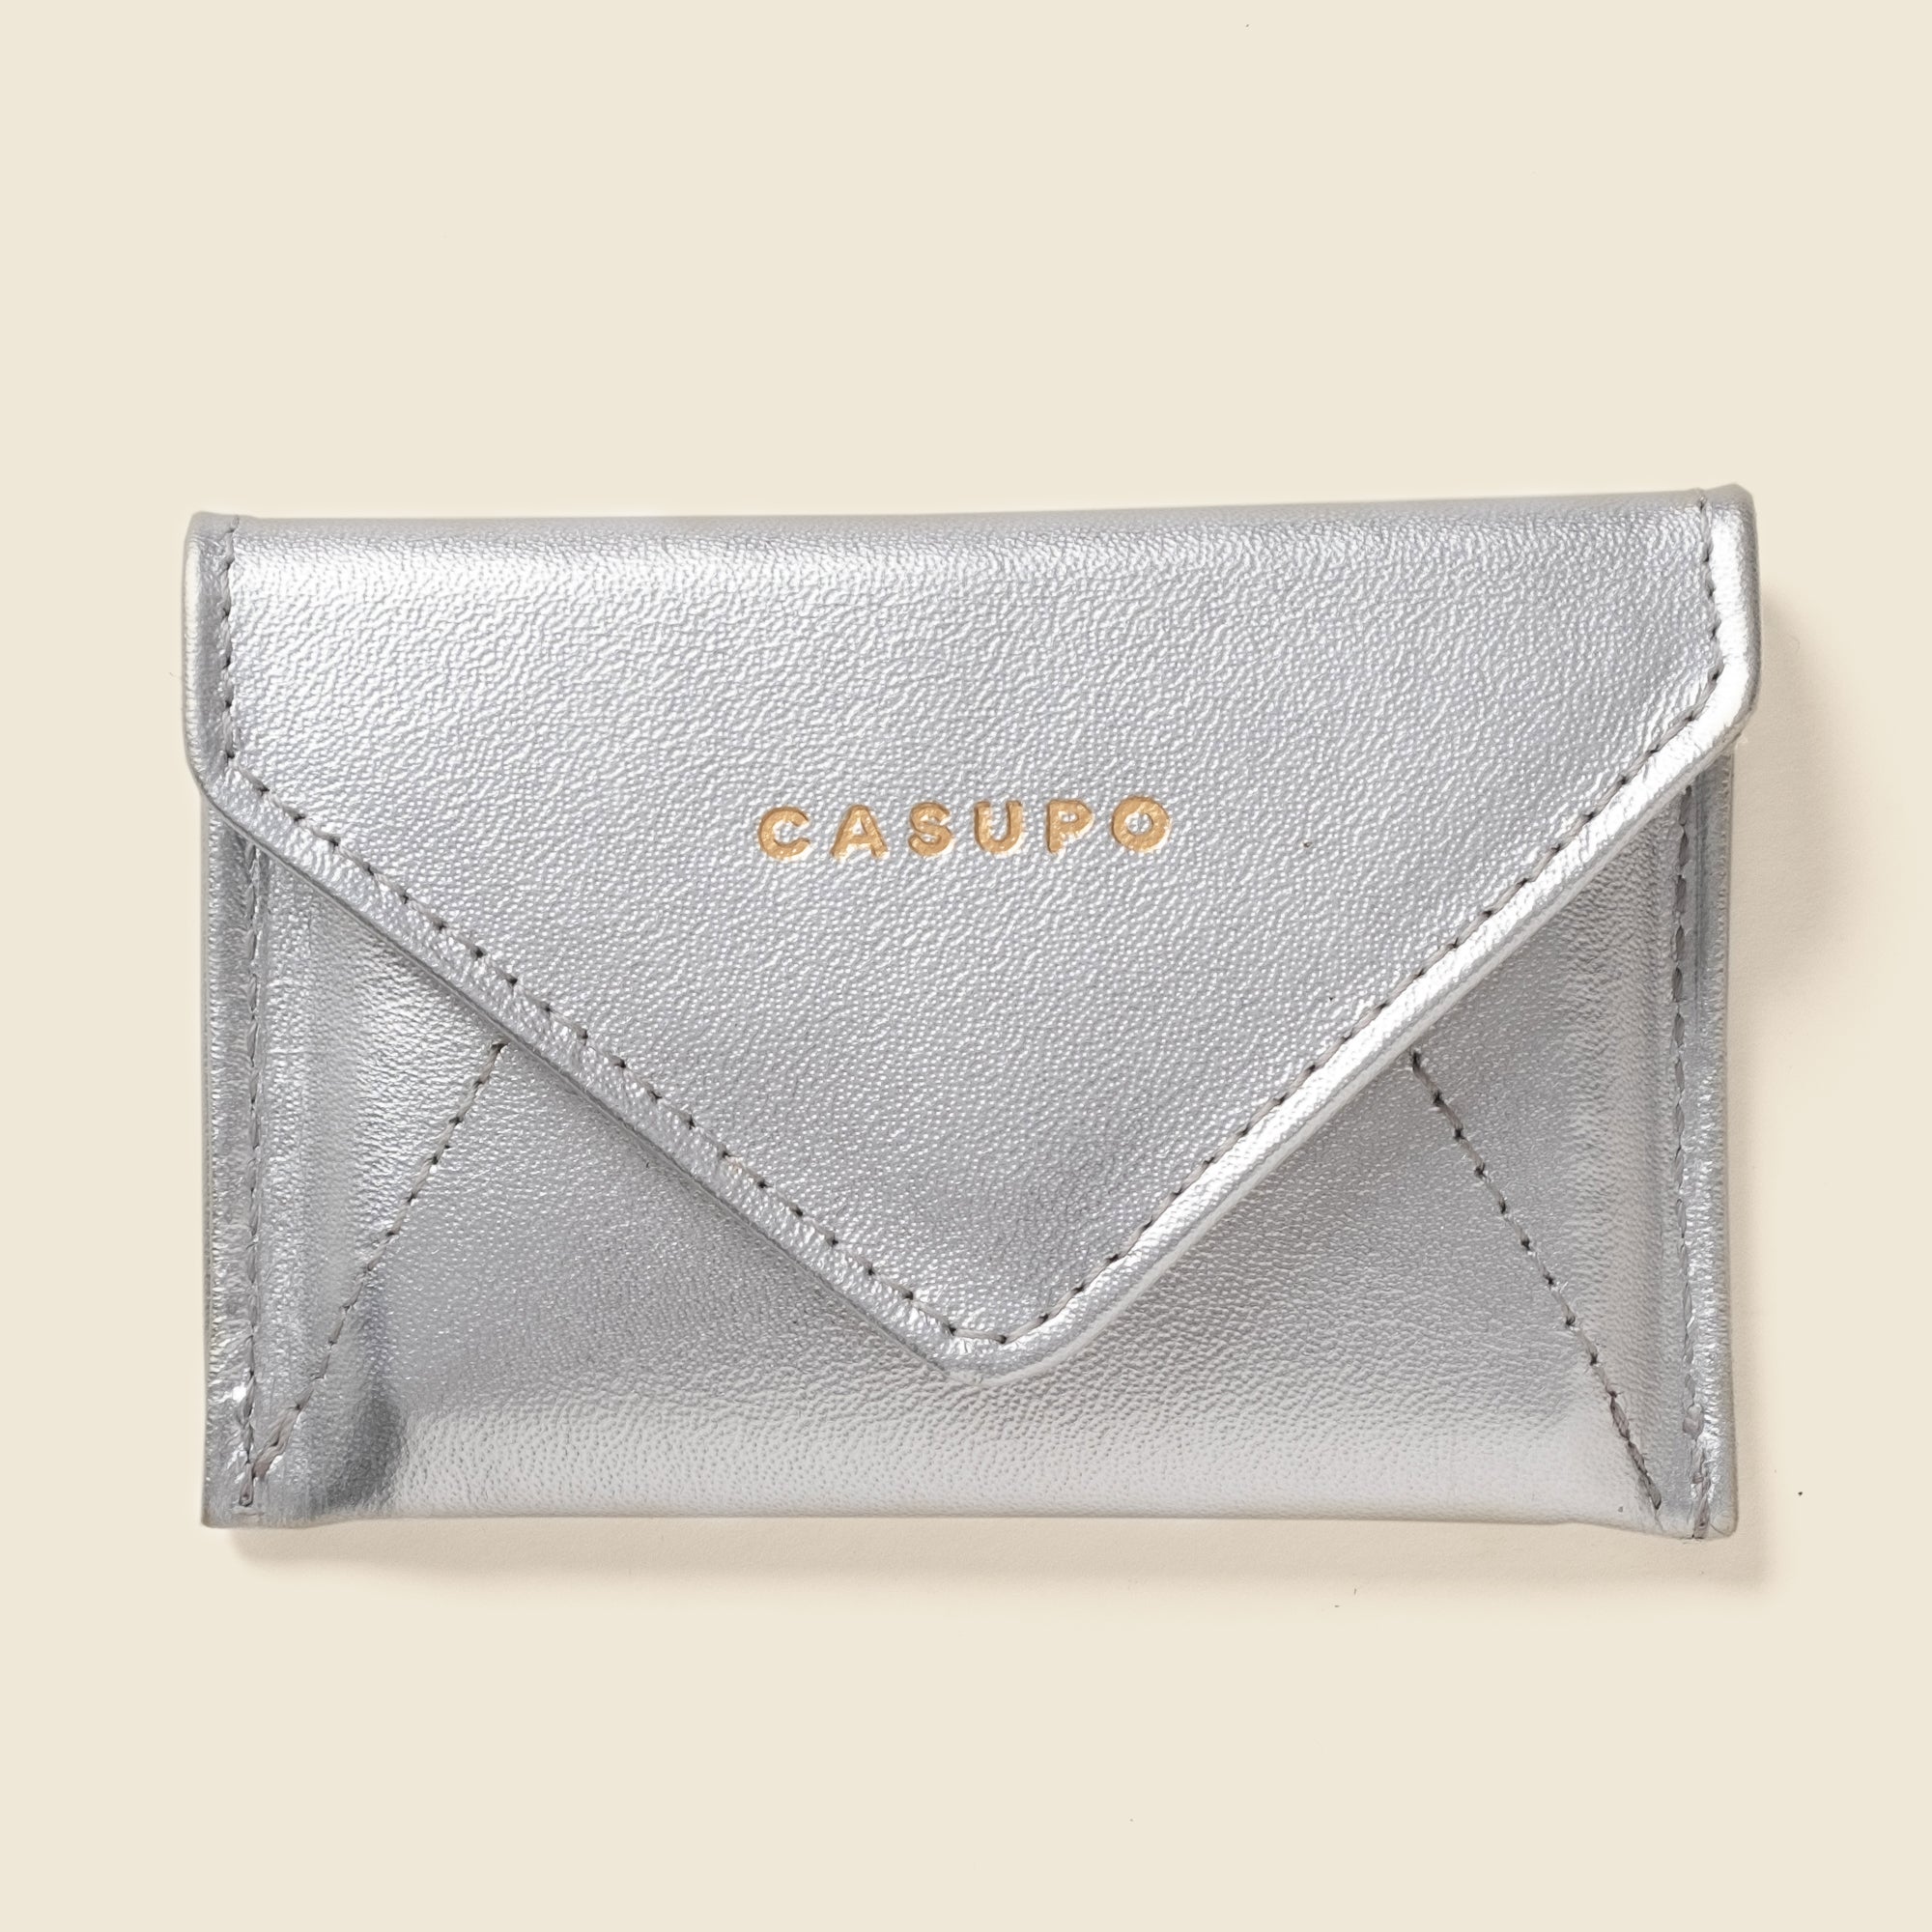 Silver leather envelope wallet from Casupo